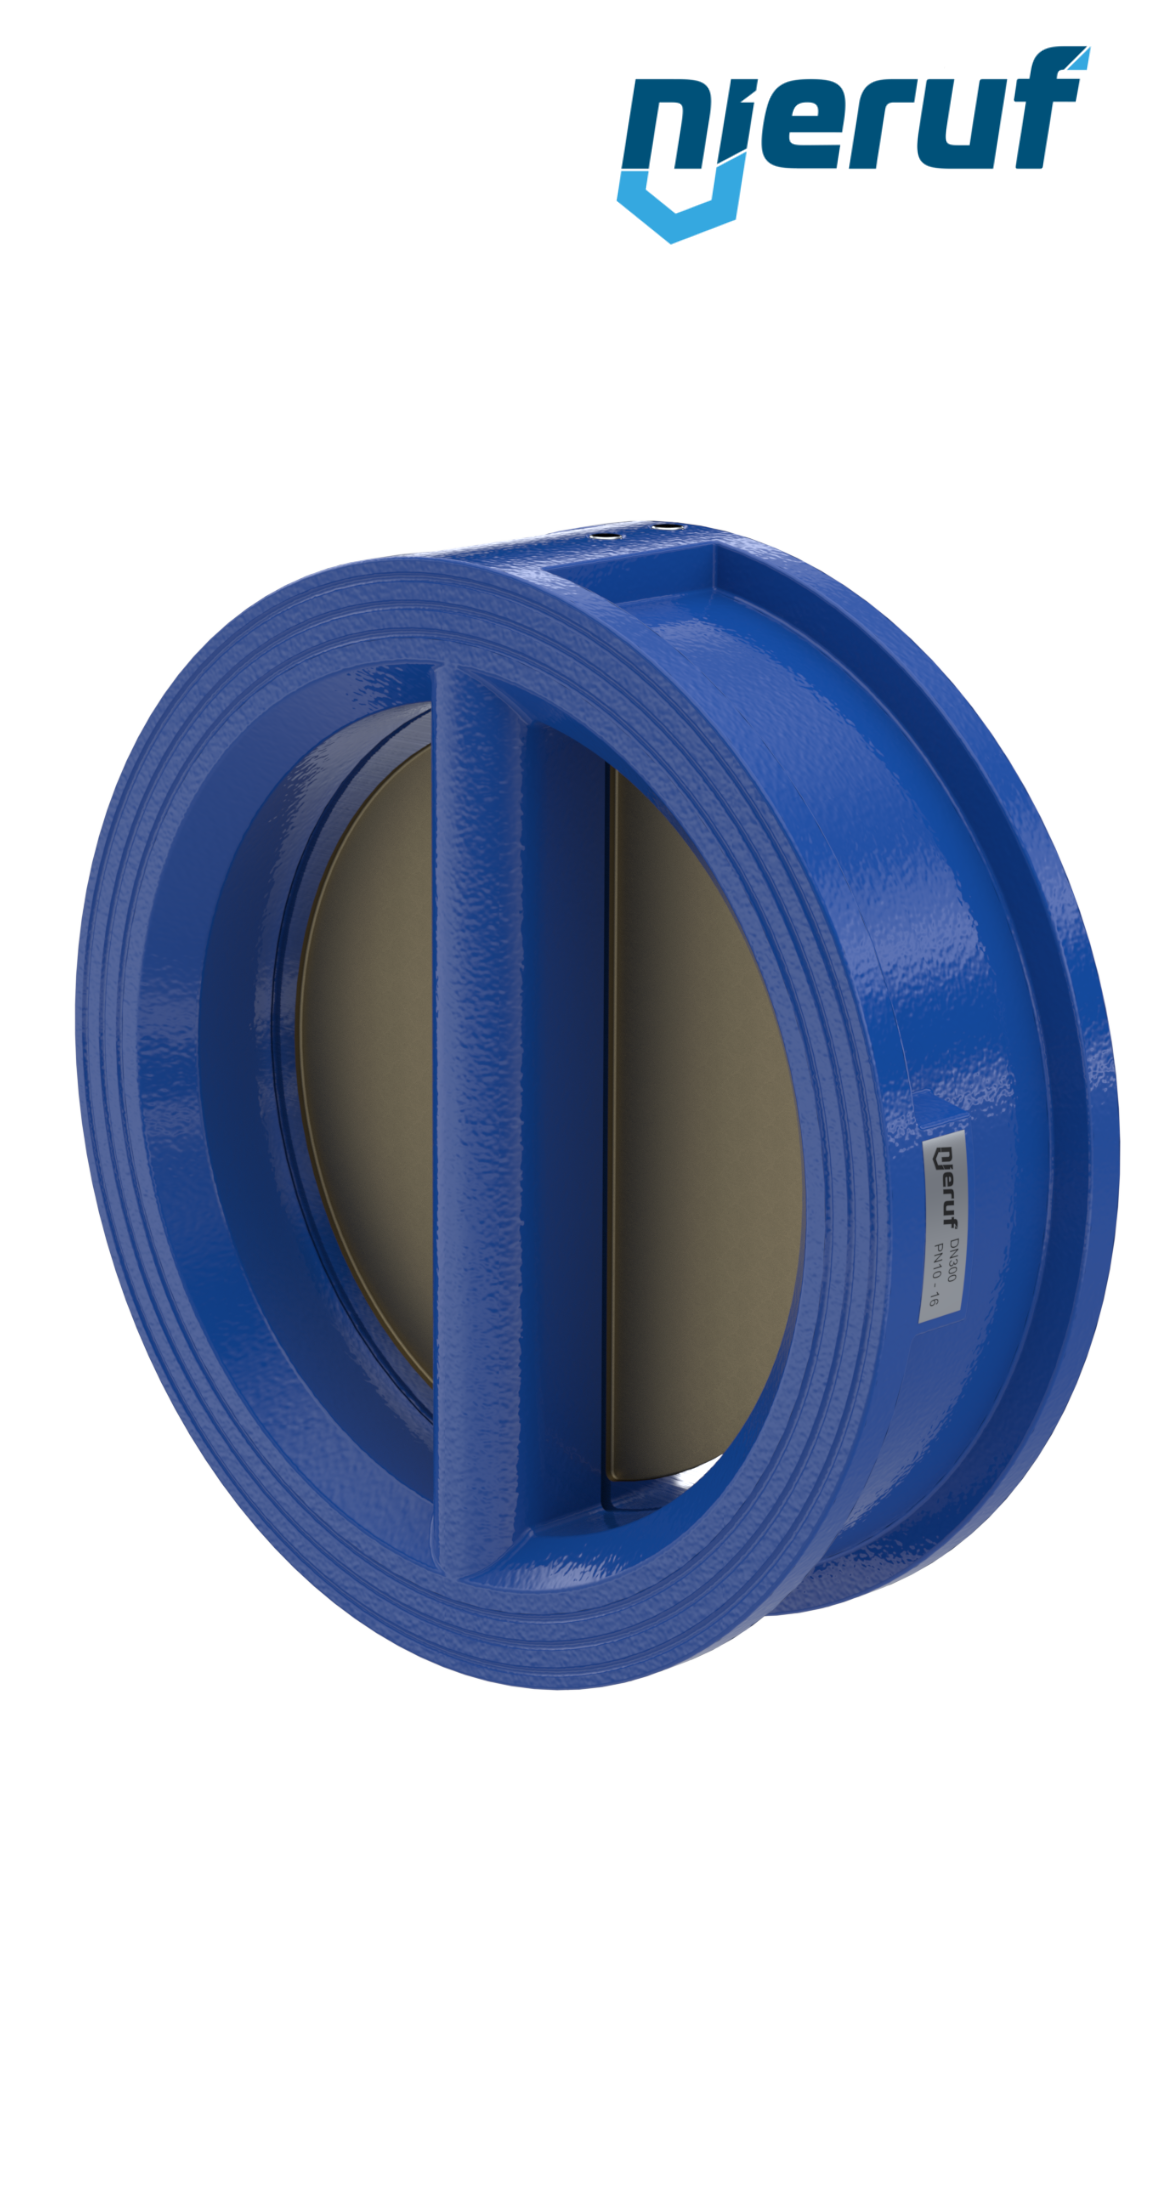 dual plate check valve DN300 DR04 GGG40 epoxyd plated blue 180µm EPDM